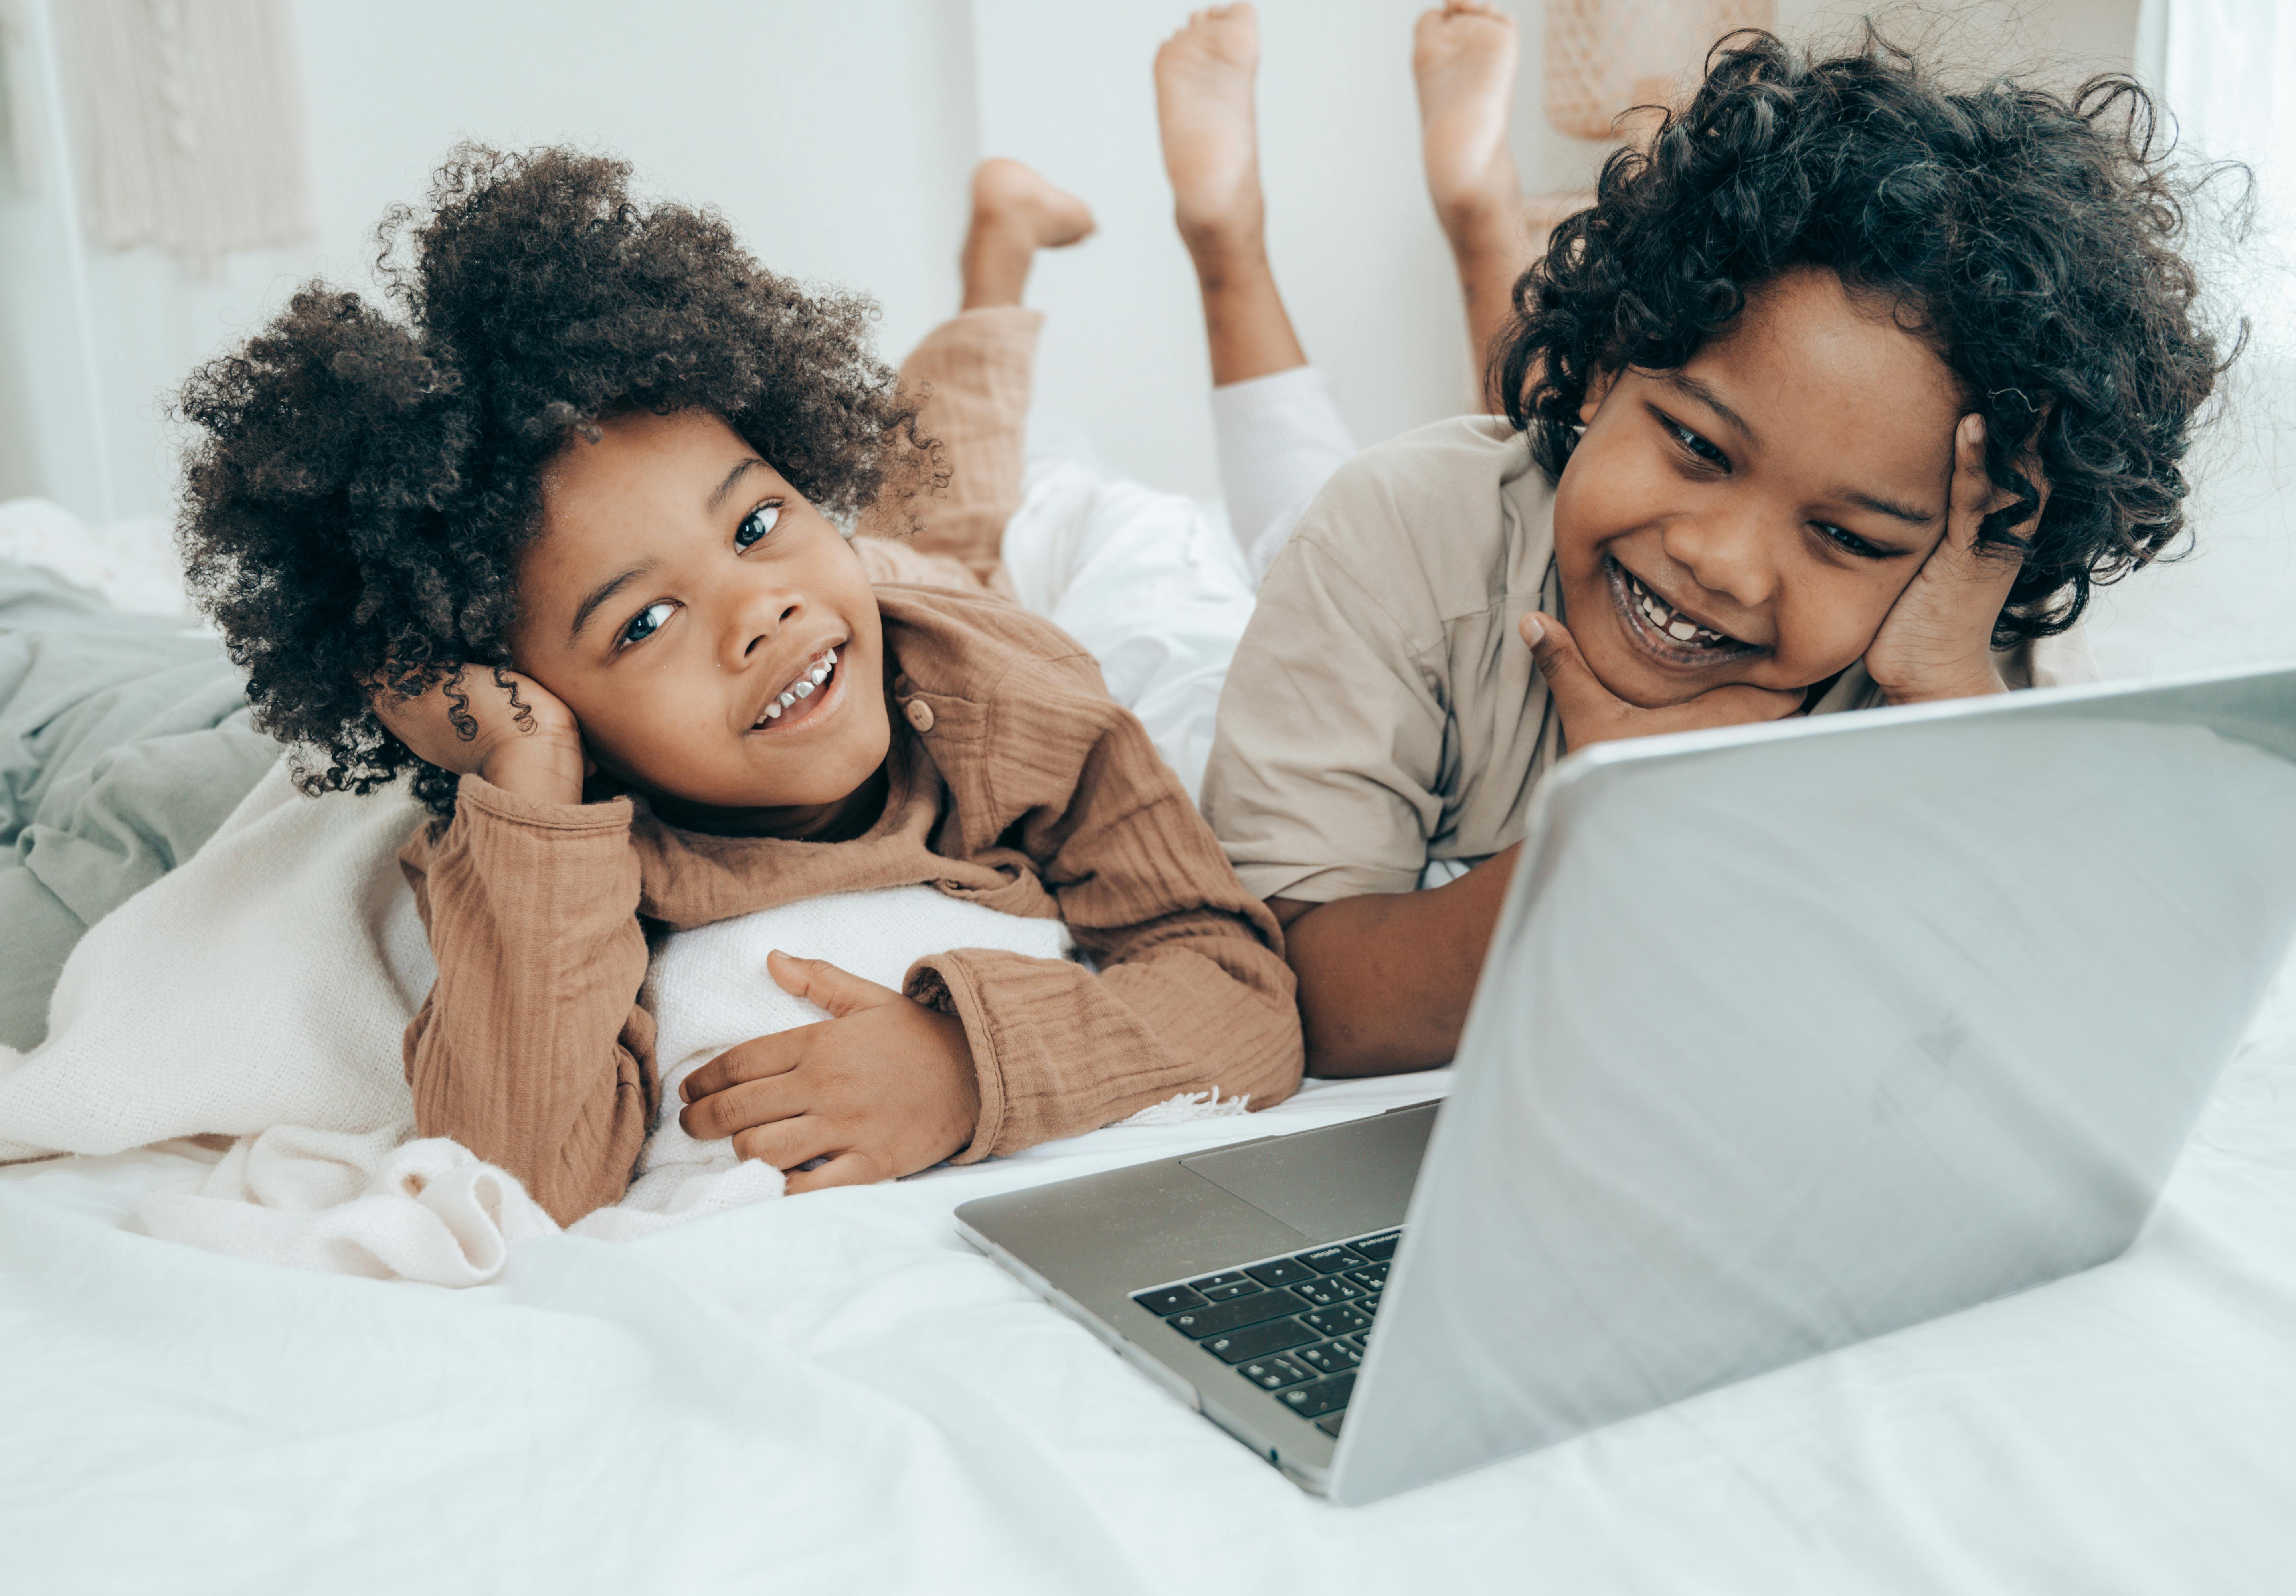 Smiley black boys watching funny video on laptop on bed · Free Stock Photo